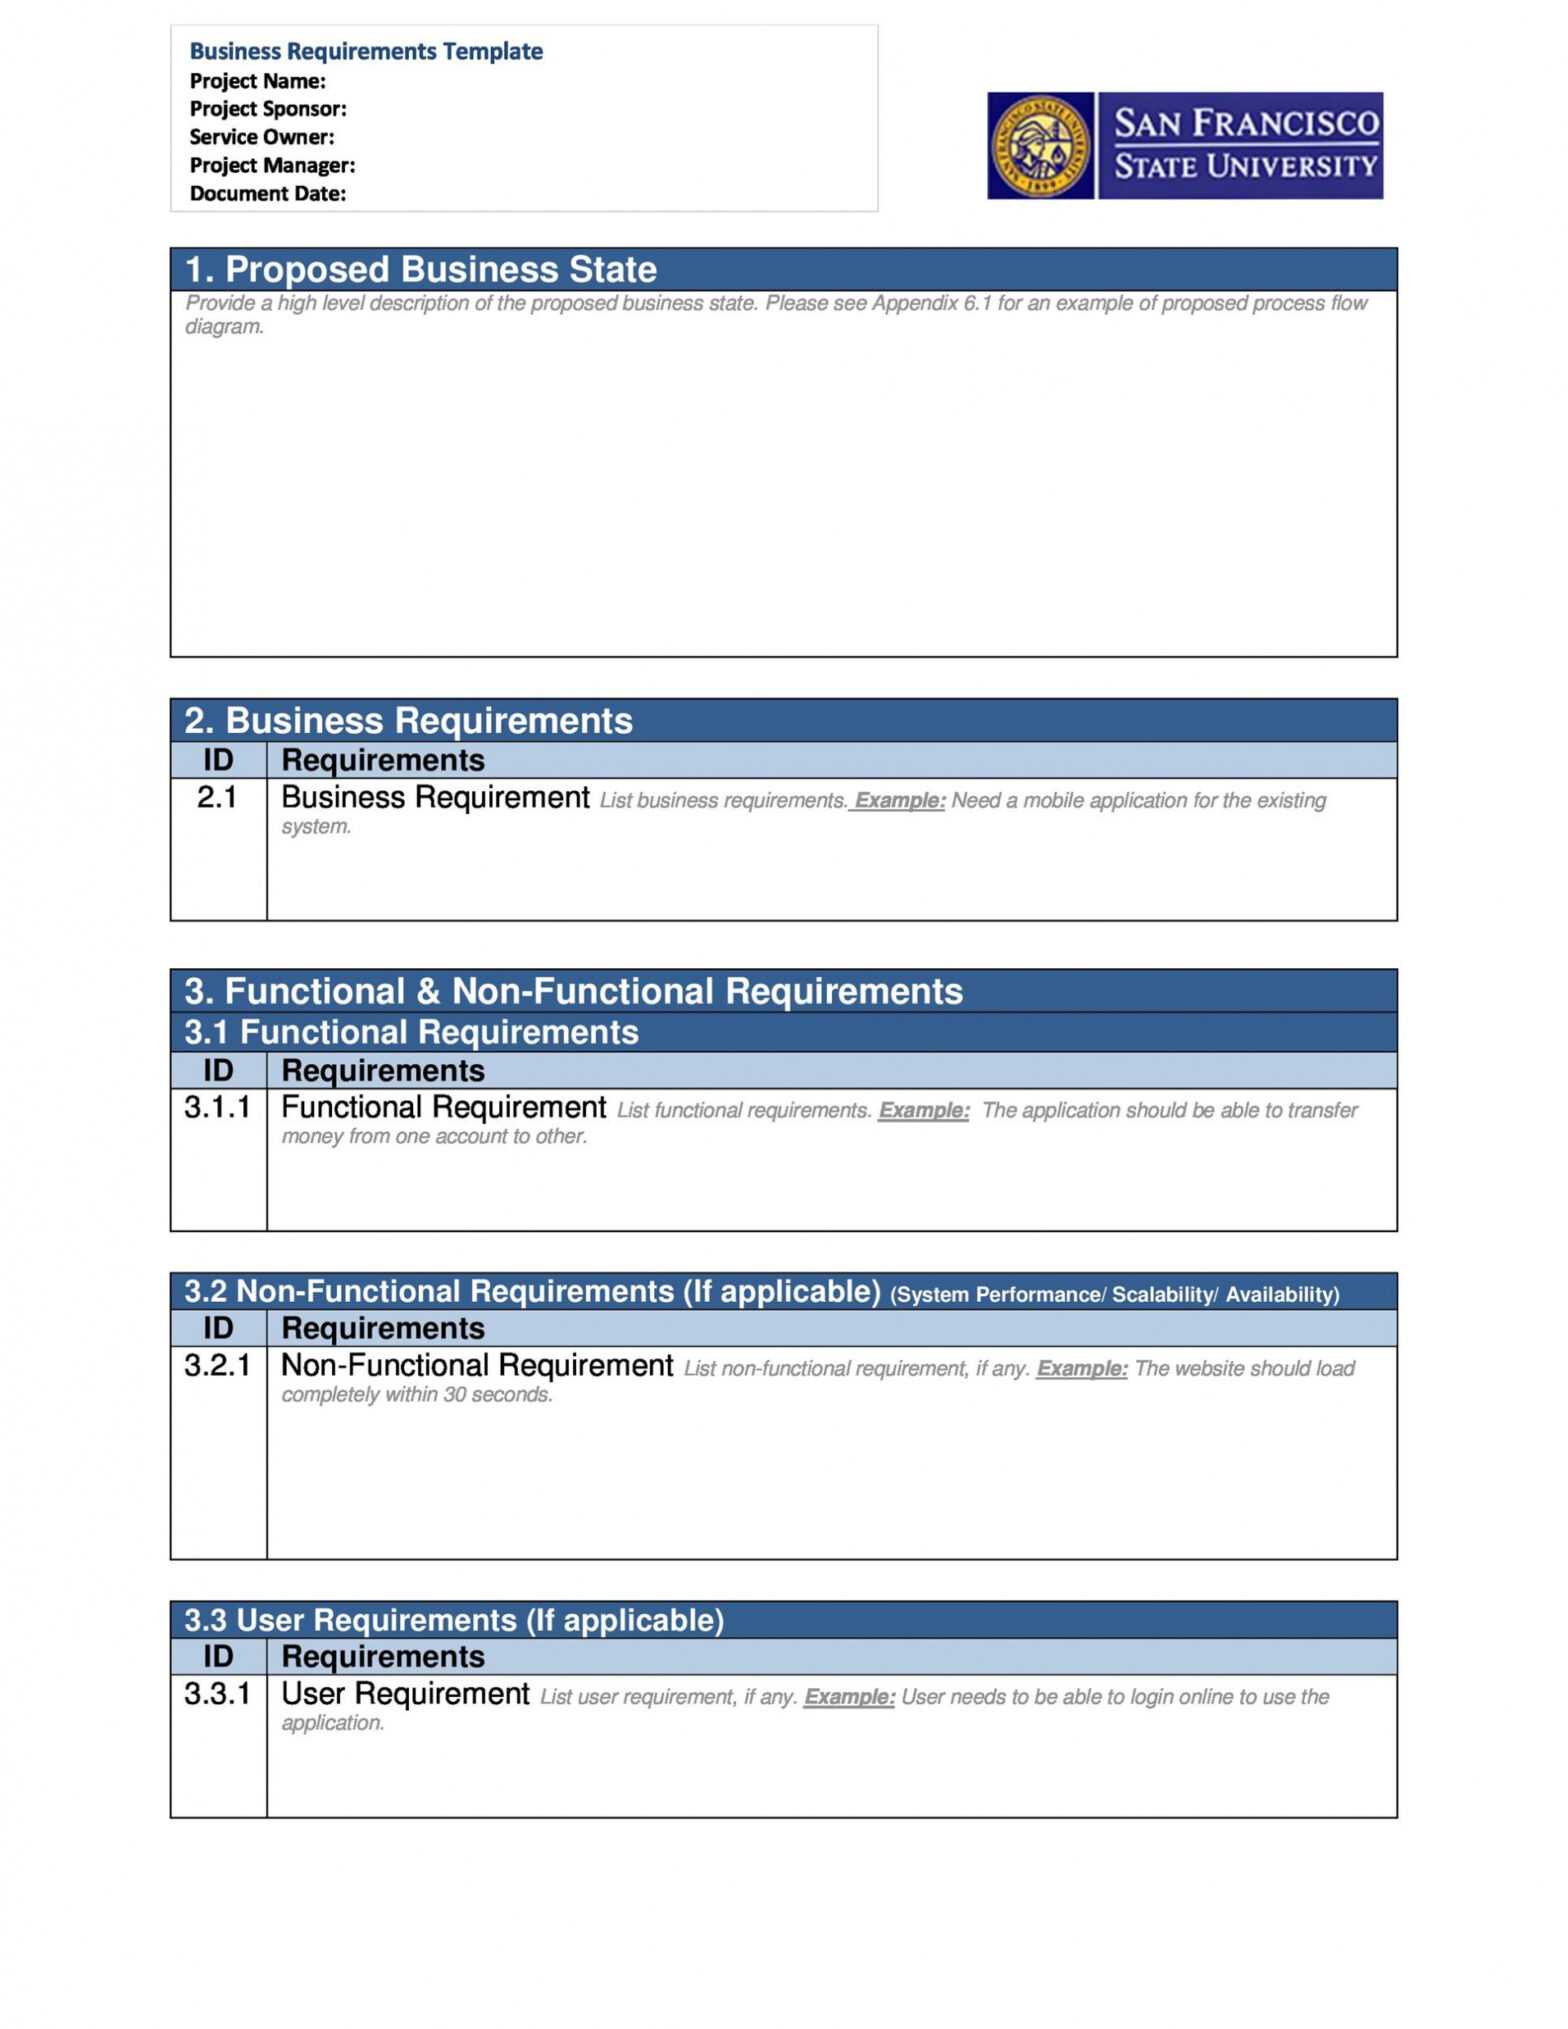 40+ Simple Business Requirements Document Templates ᐅ with regard to Project Business Requirements Document Template